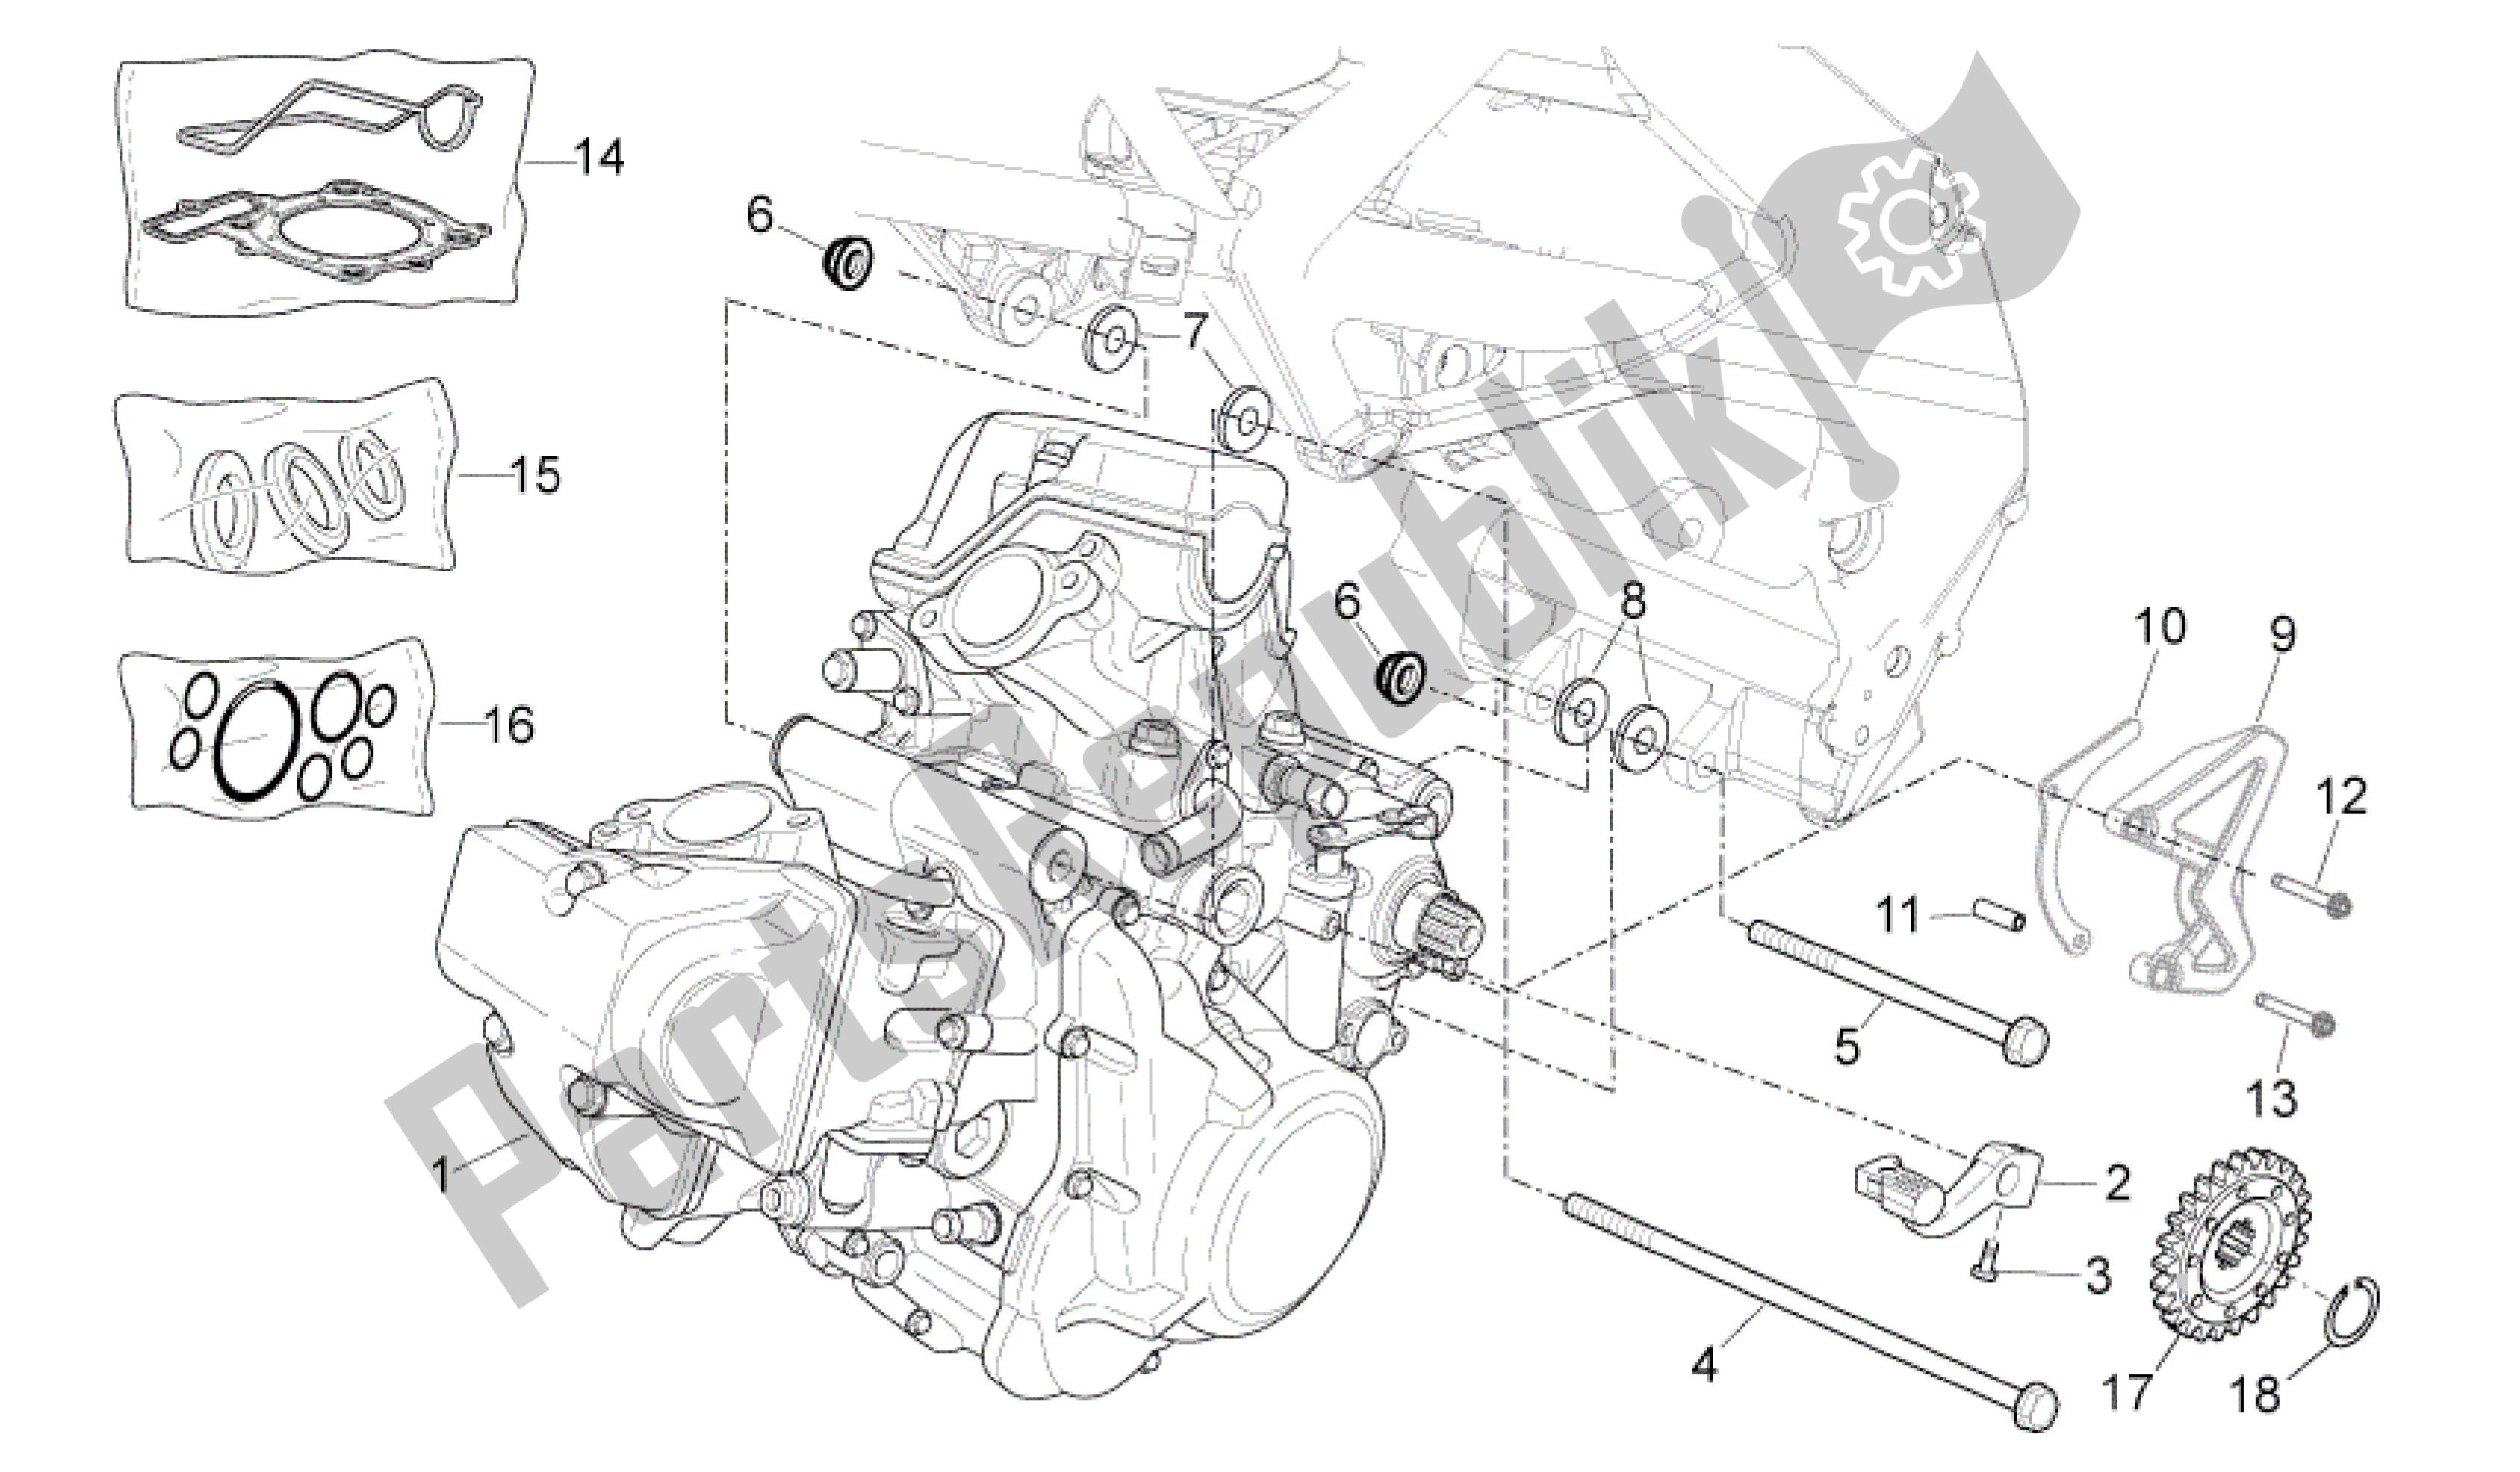 All parts for the Engine of the Aprilia RXV 550 2009 - 2011